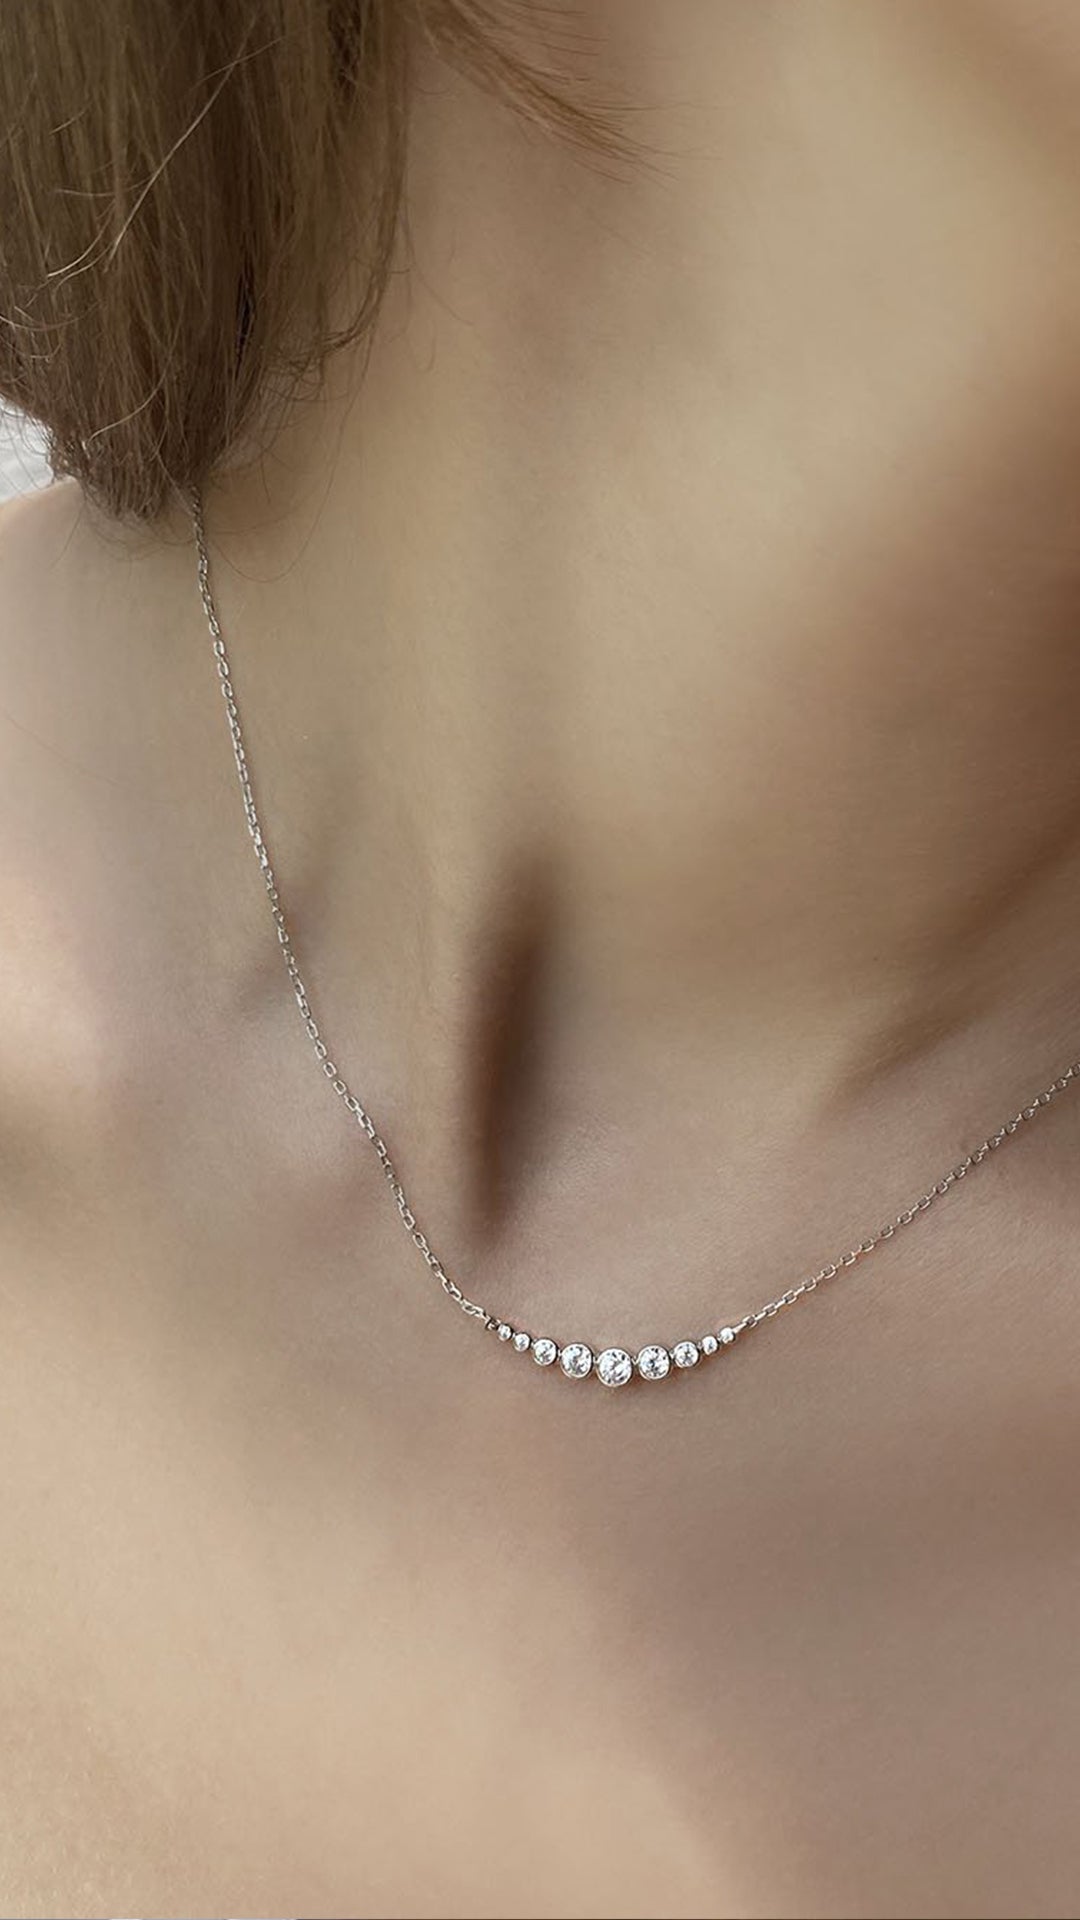 CARAT London Cyndi Necklace - Necklaces from Bradbury's The Jewellers UK